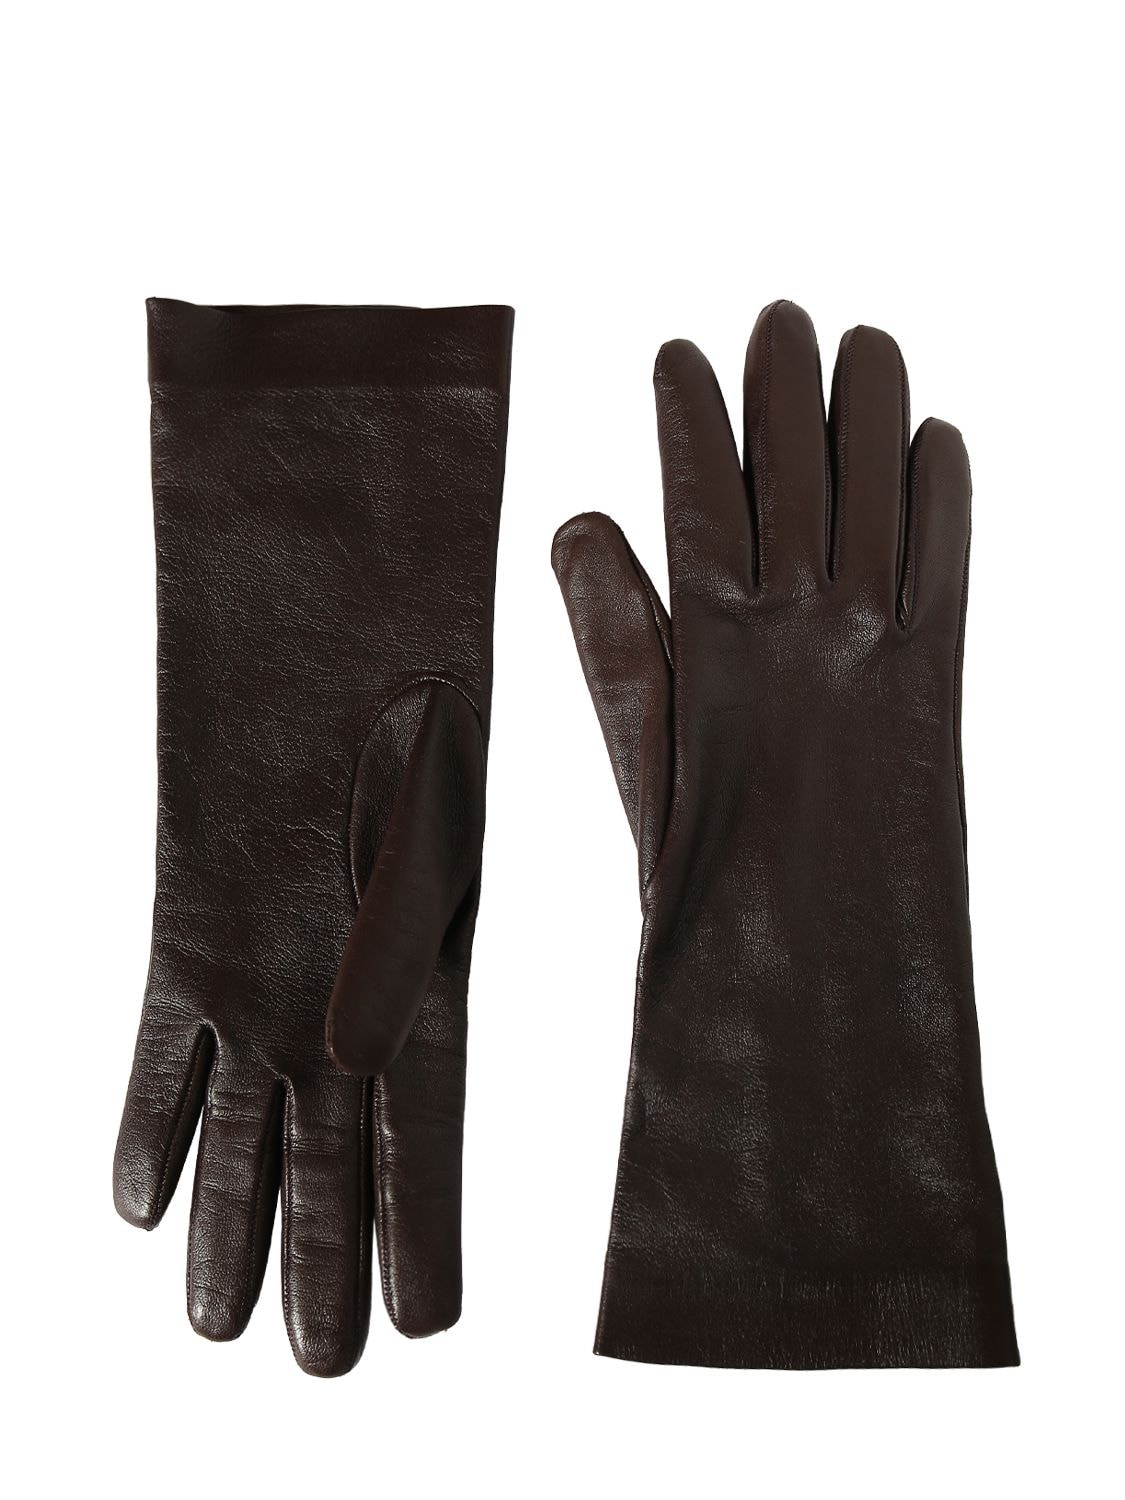 Saint Laurent Leather Gloves In Expresso